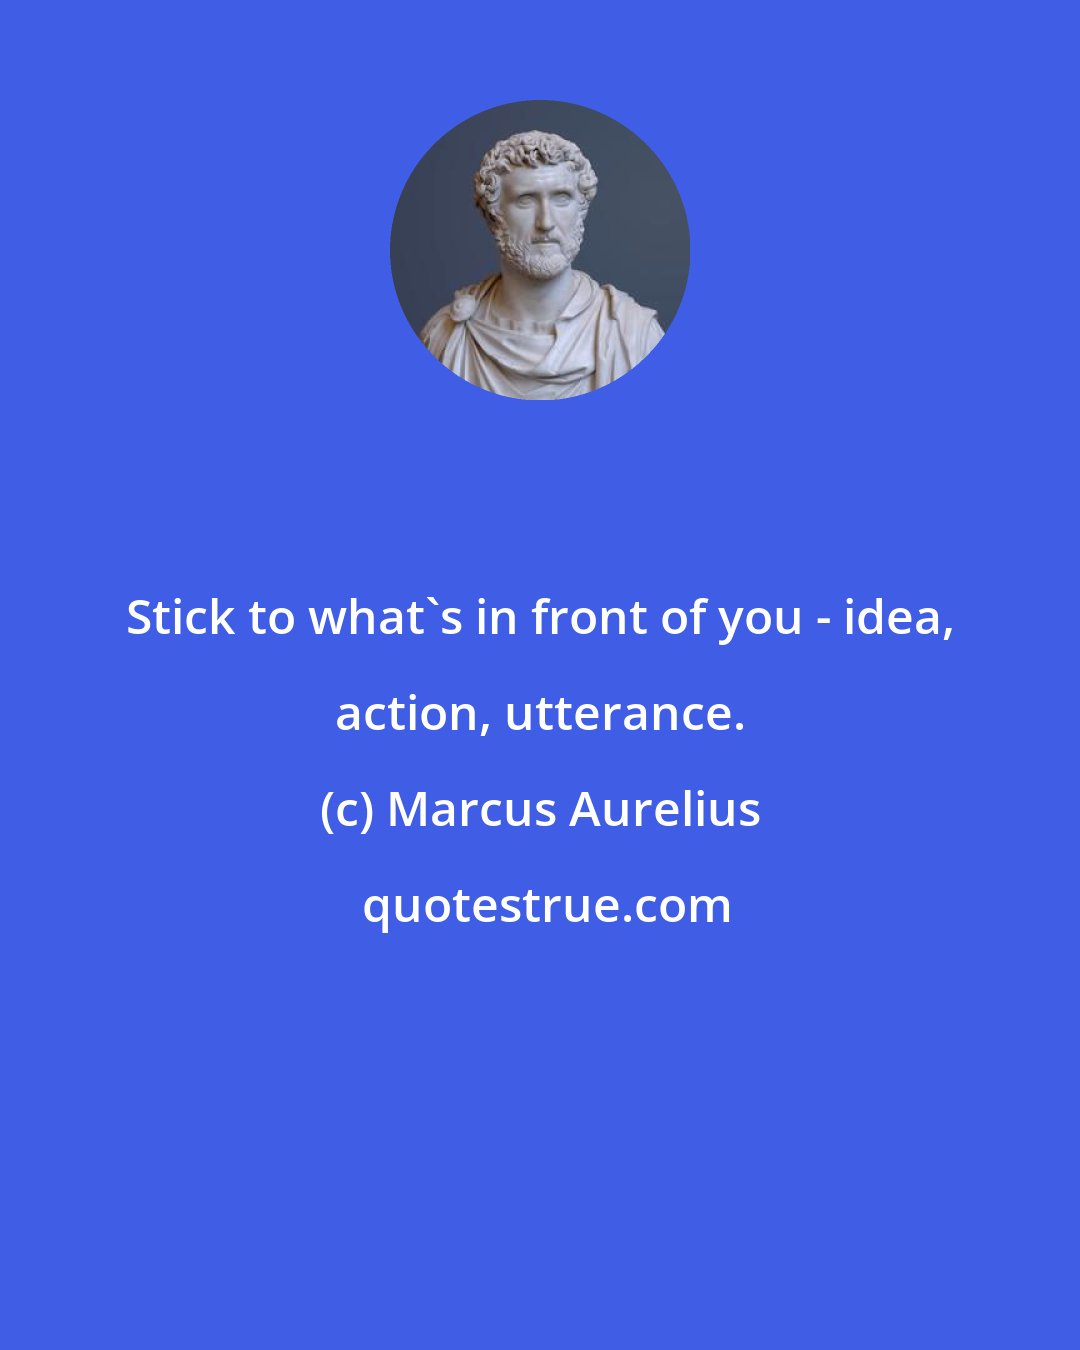 Marcus Aurelius: Stick to what's in front of you - idea, action, utterance.